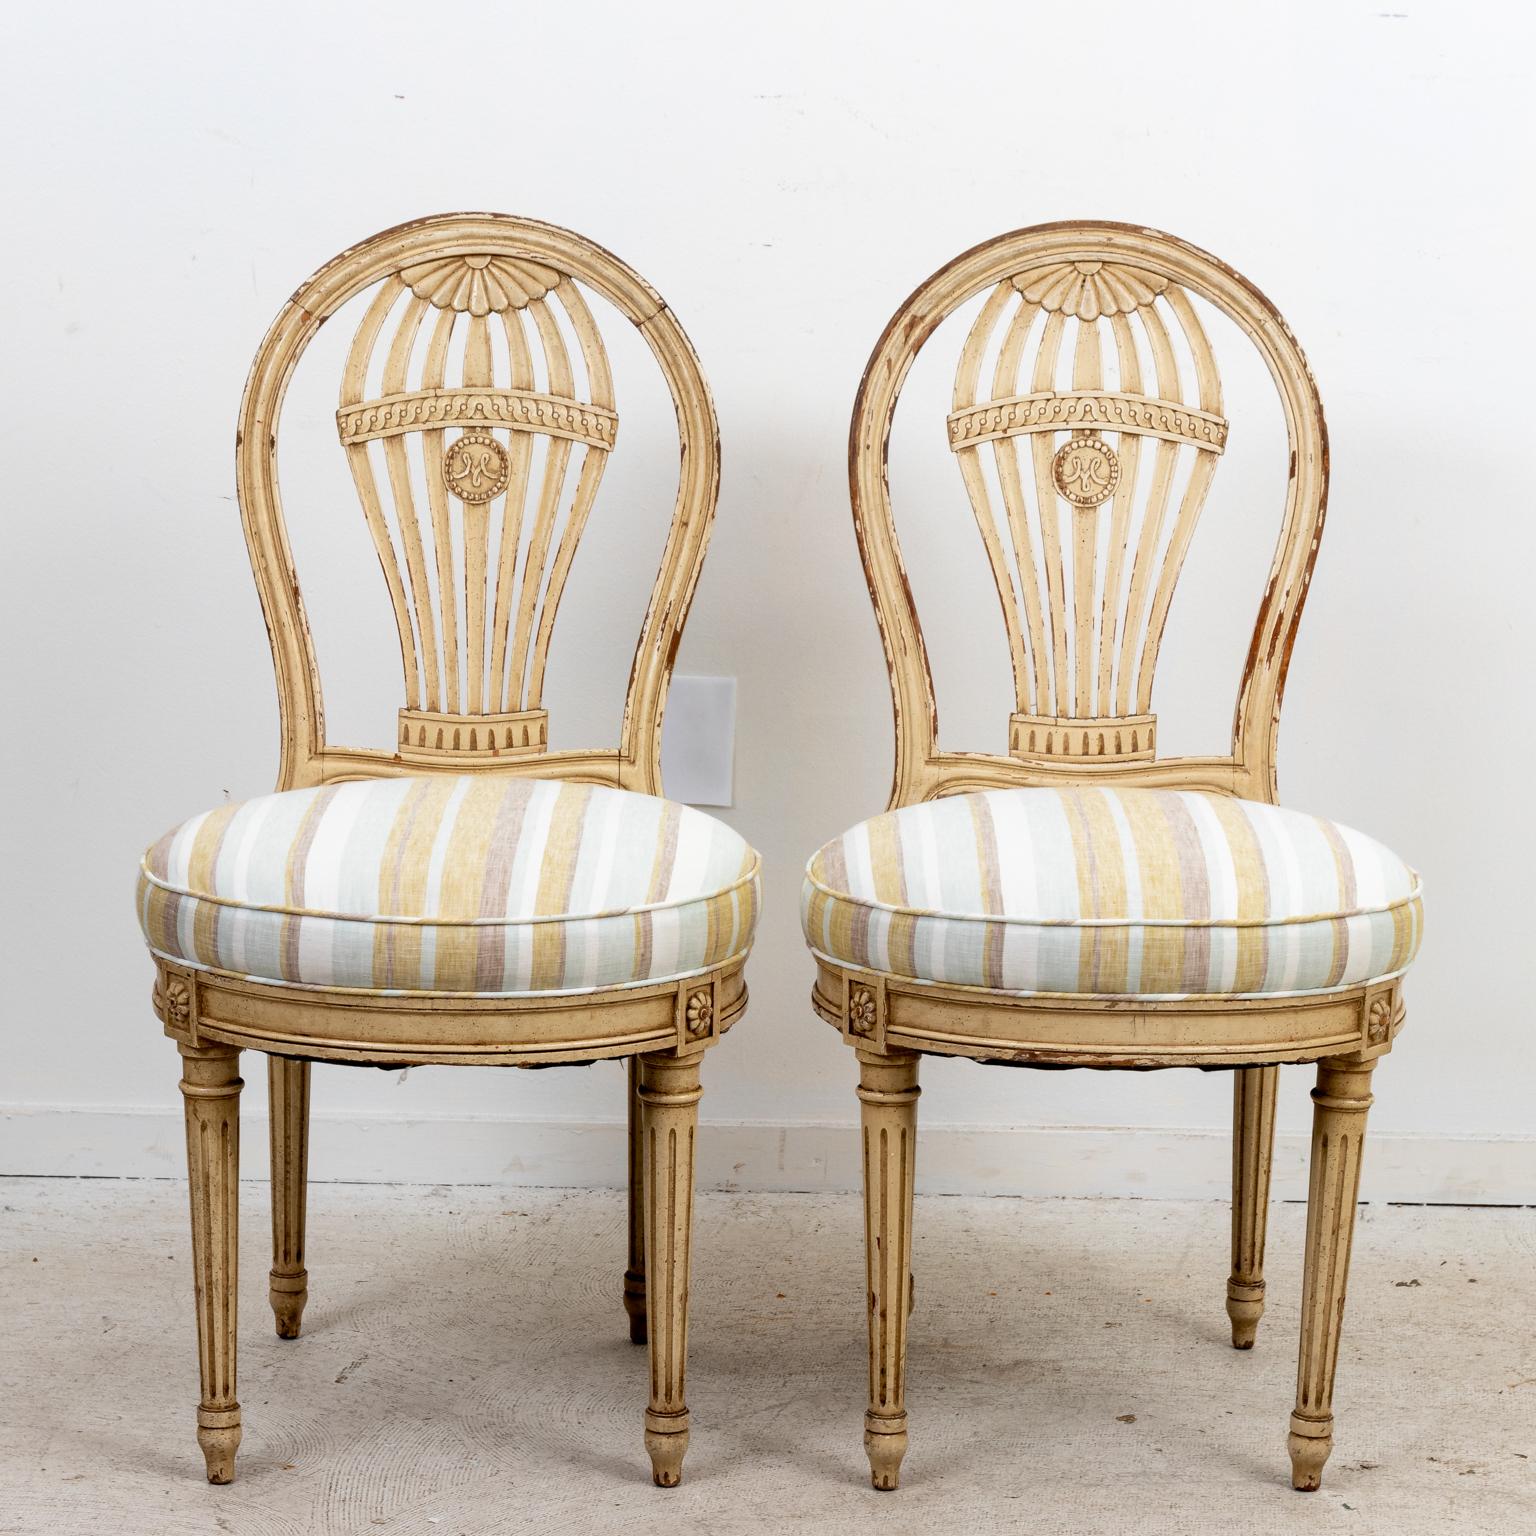 Pair of French pierced balloon back side chairs with newly reupholstered round seats in a soft striped linen fabric, circa 1920.